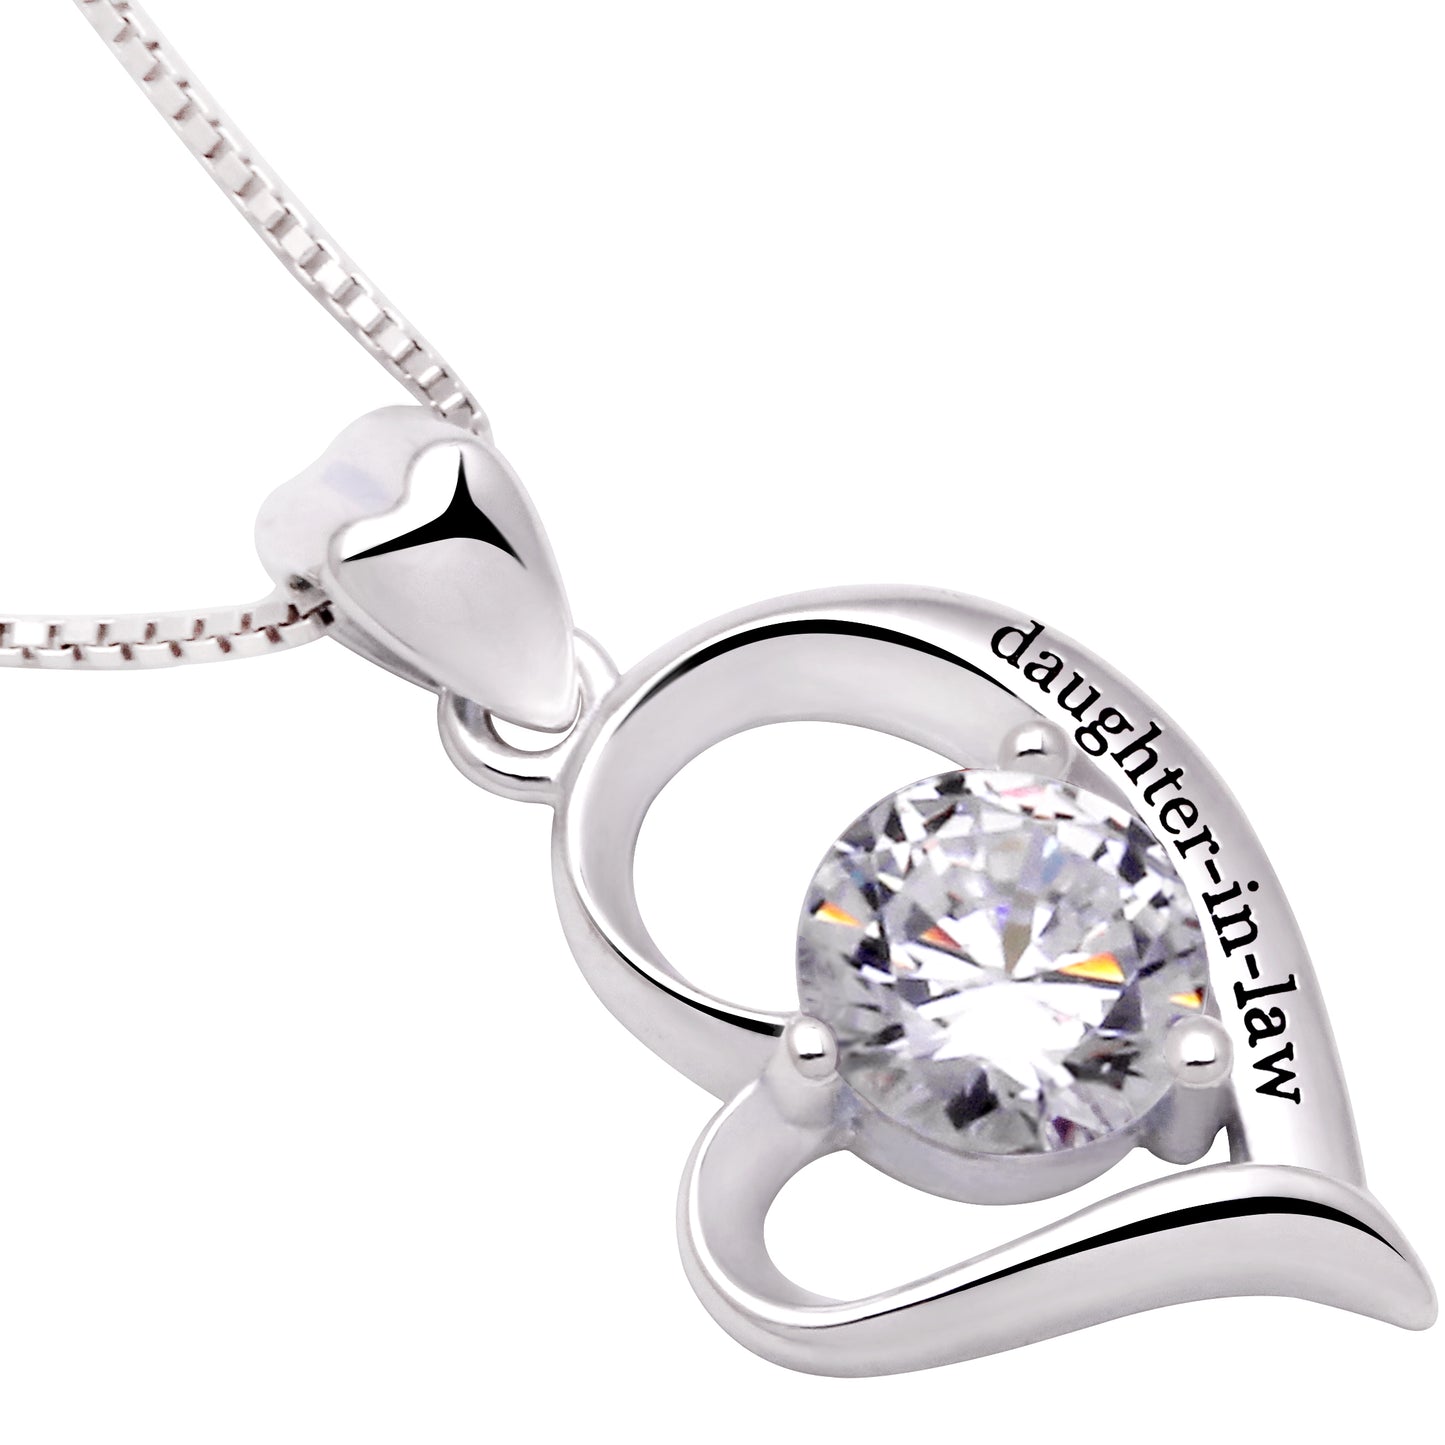 ALOV Jewelry Sterling Silver "daughter-in-law" Love Heart Cubic Zirconia Pendant Necklace